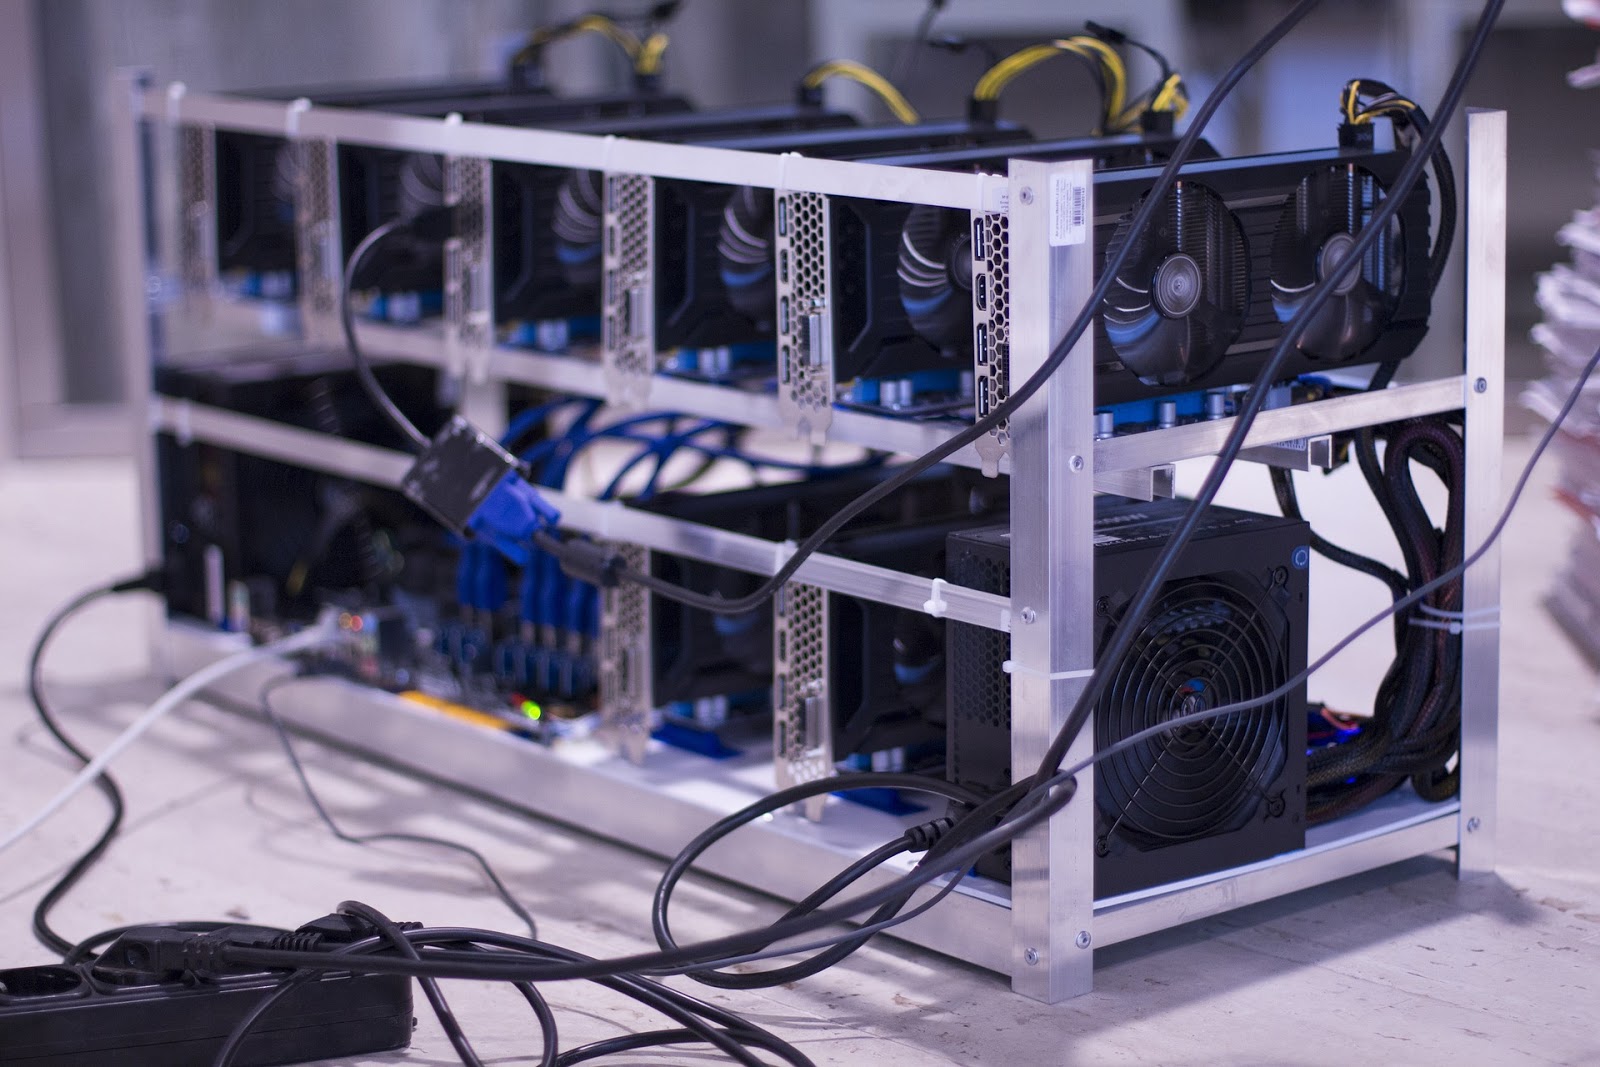 We present you all the details of bitcoin mining and how to earn bitcoin from mining it